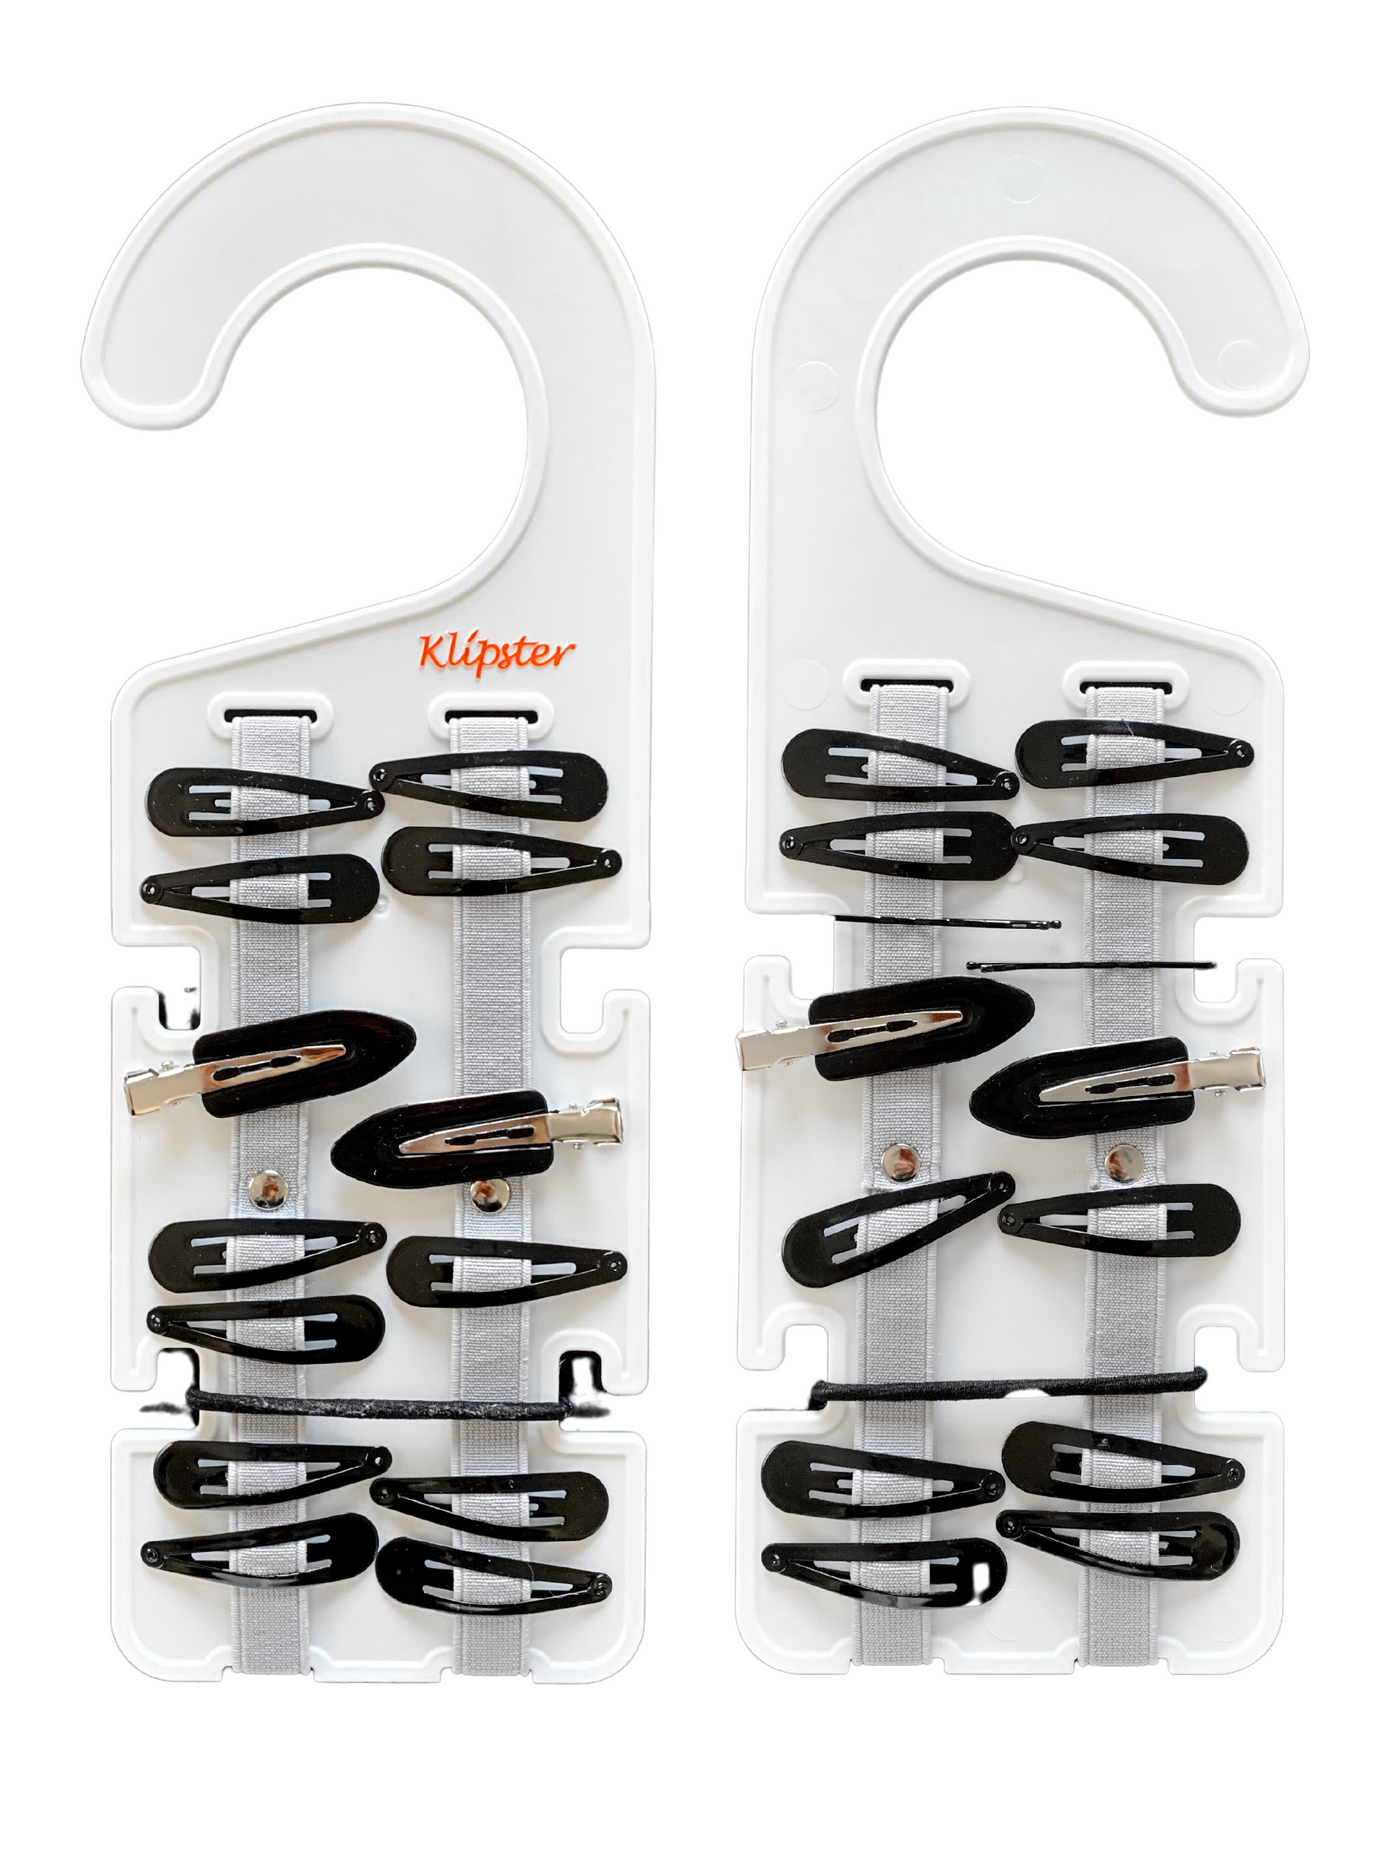 Classic Klipster Hair Accessories Organizer is double-sided and great for storing hair clips and yarmulka clips.